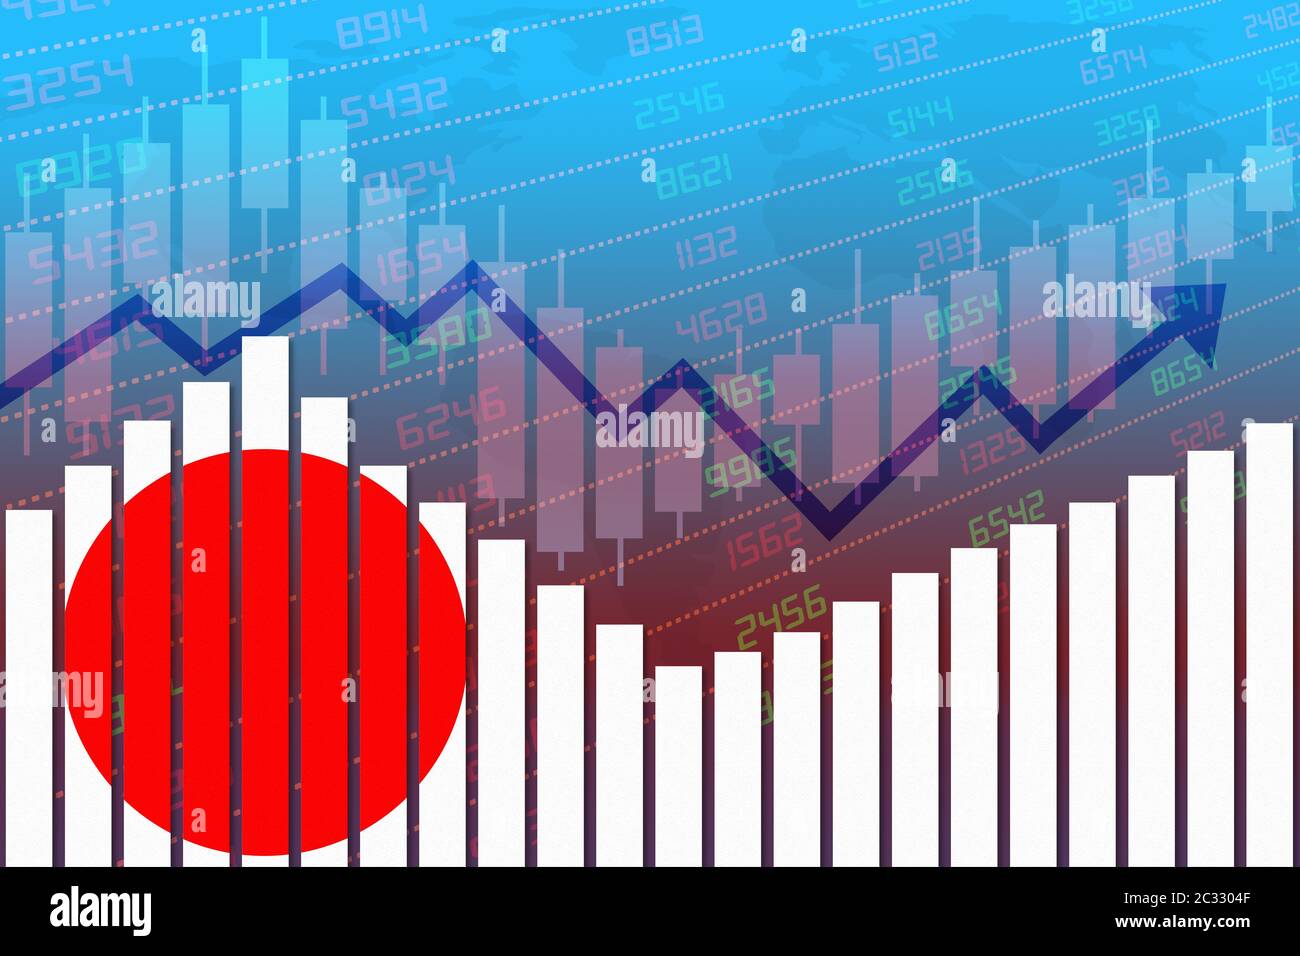 Flag of Japan on bar chart concept of economic recovery and business improving after crisis such as Covid-19 or other catastrophe as economy and busin Stock Photo